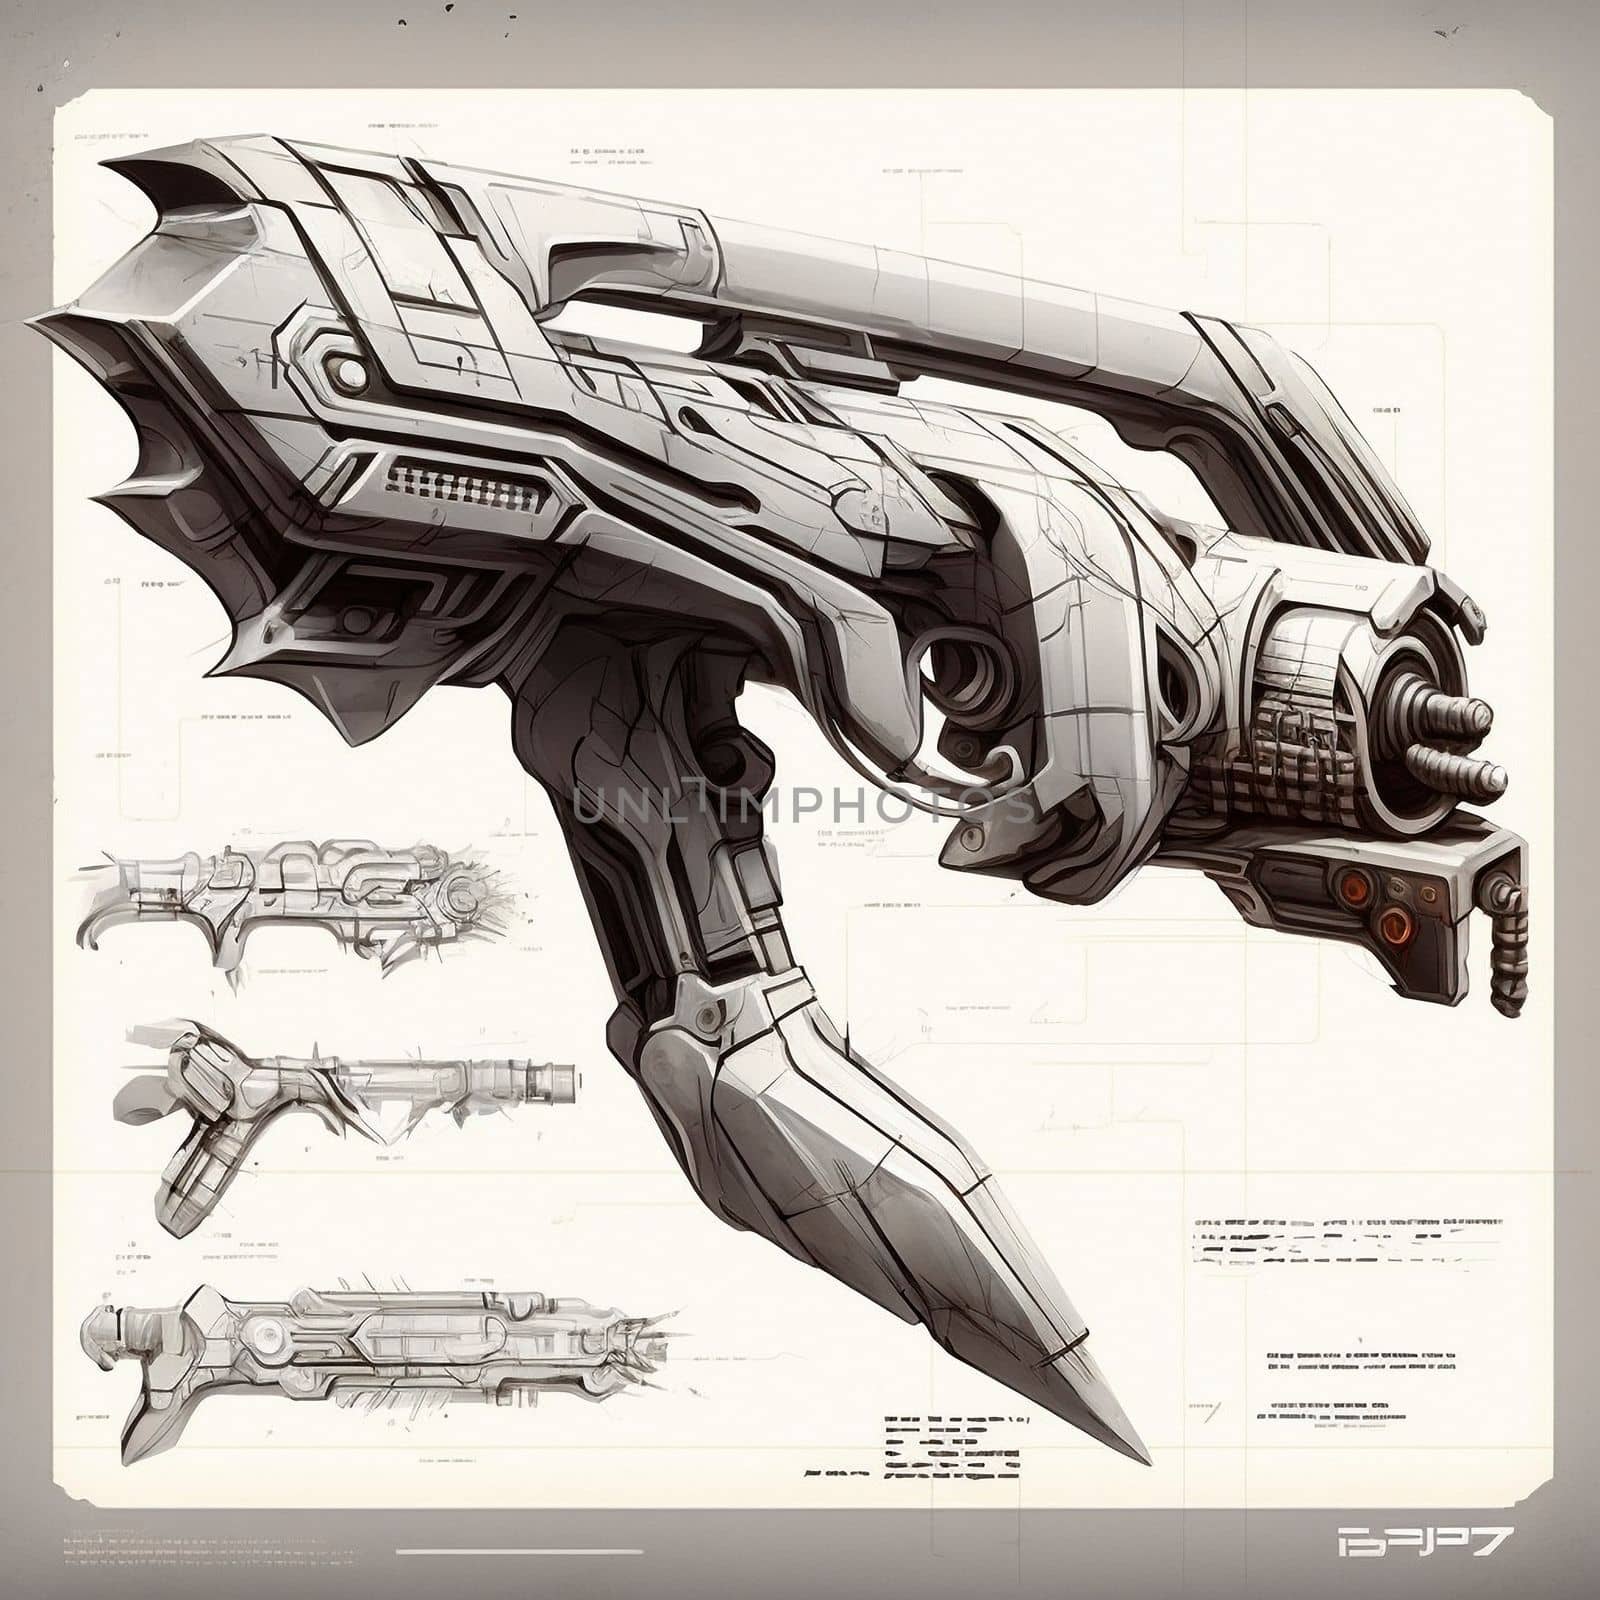 Sketch of a futuristic weapon by NeuroSky